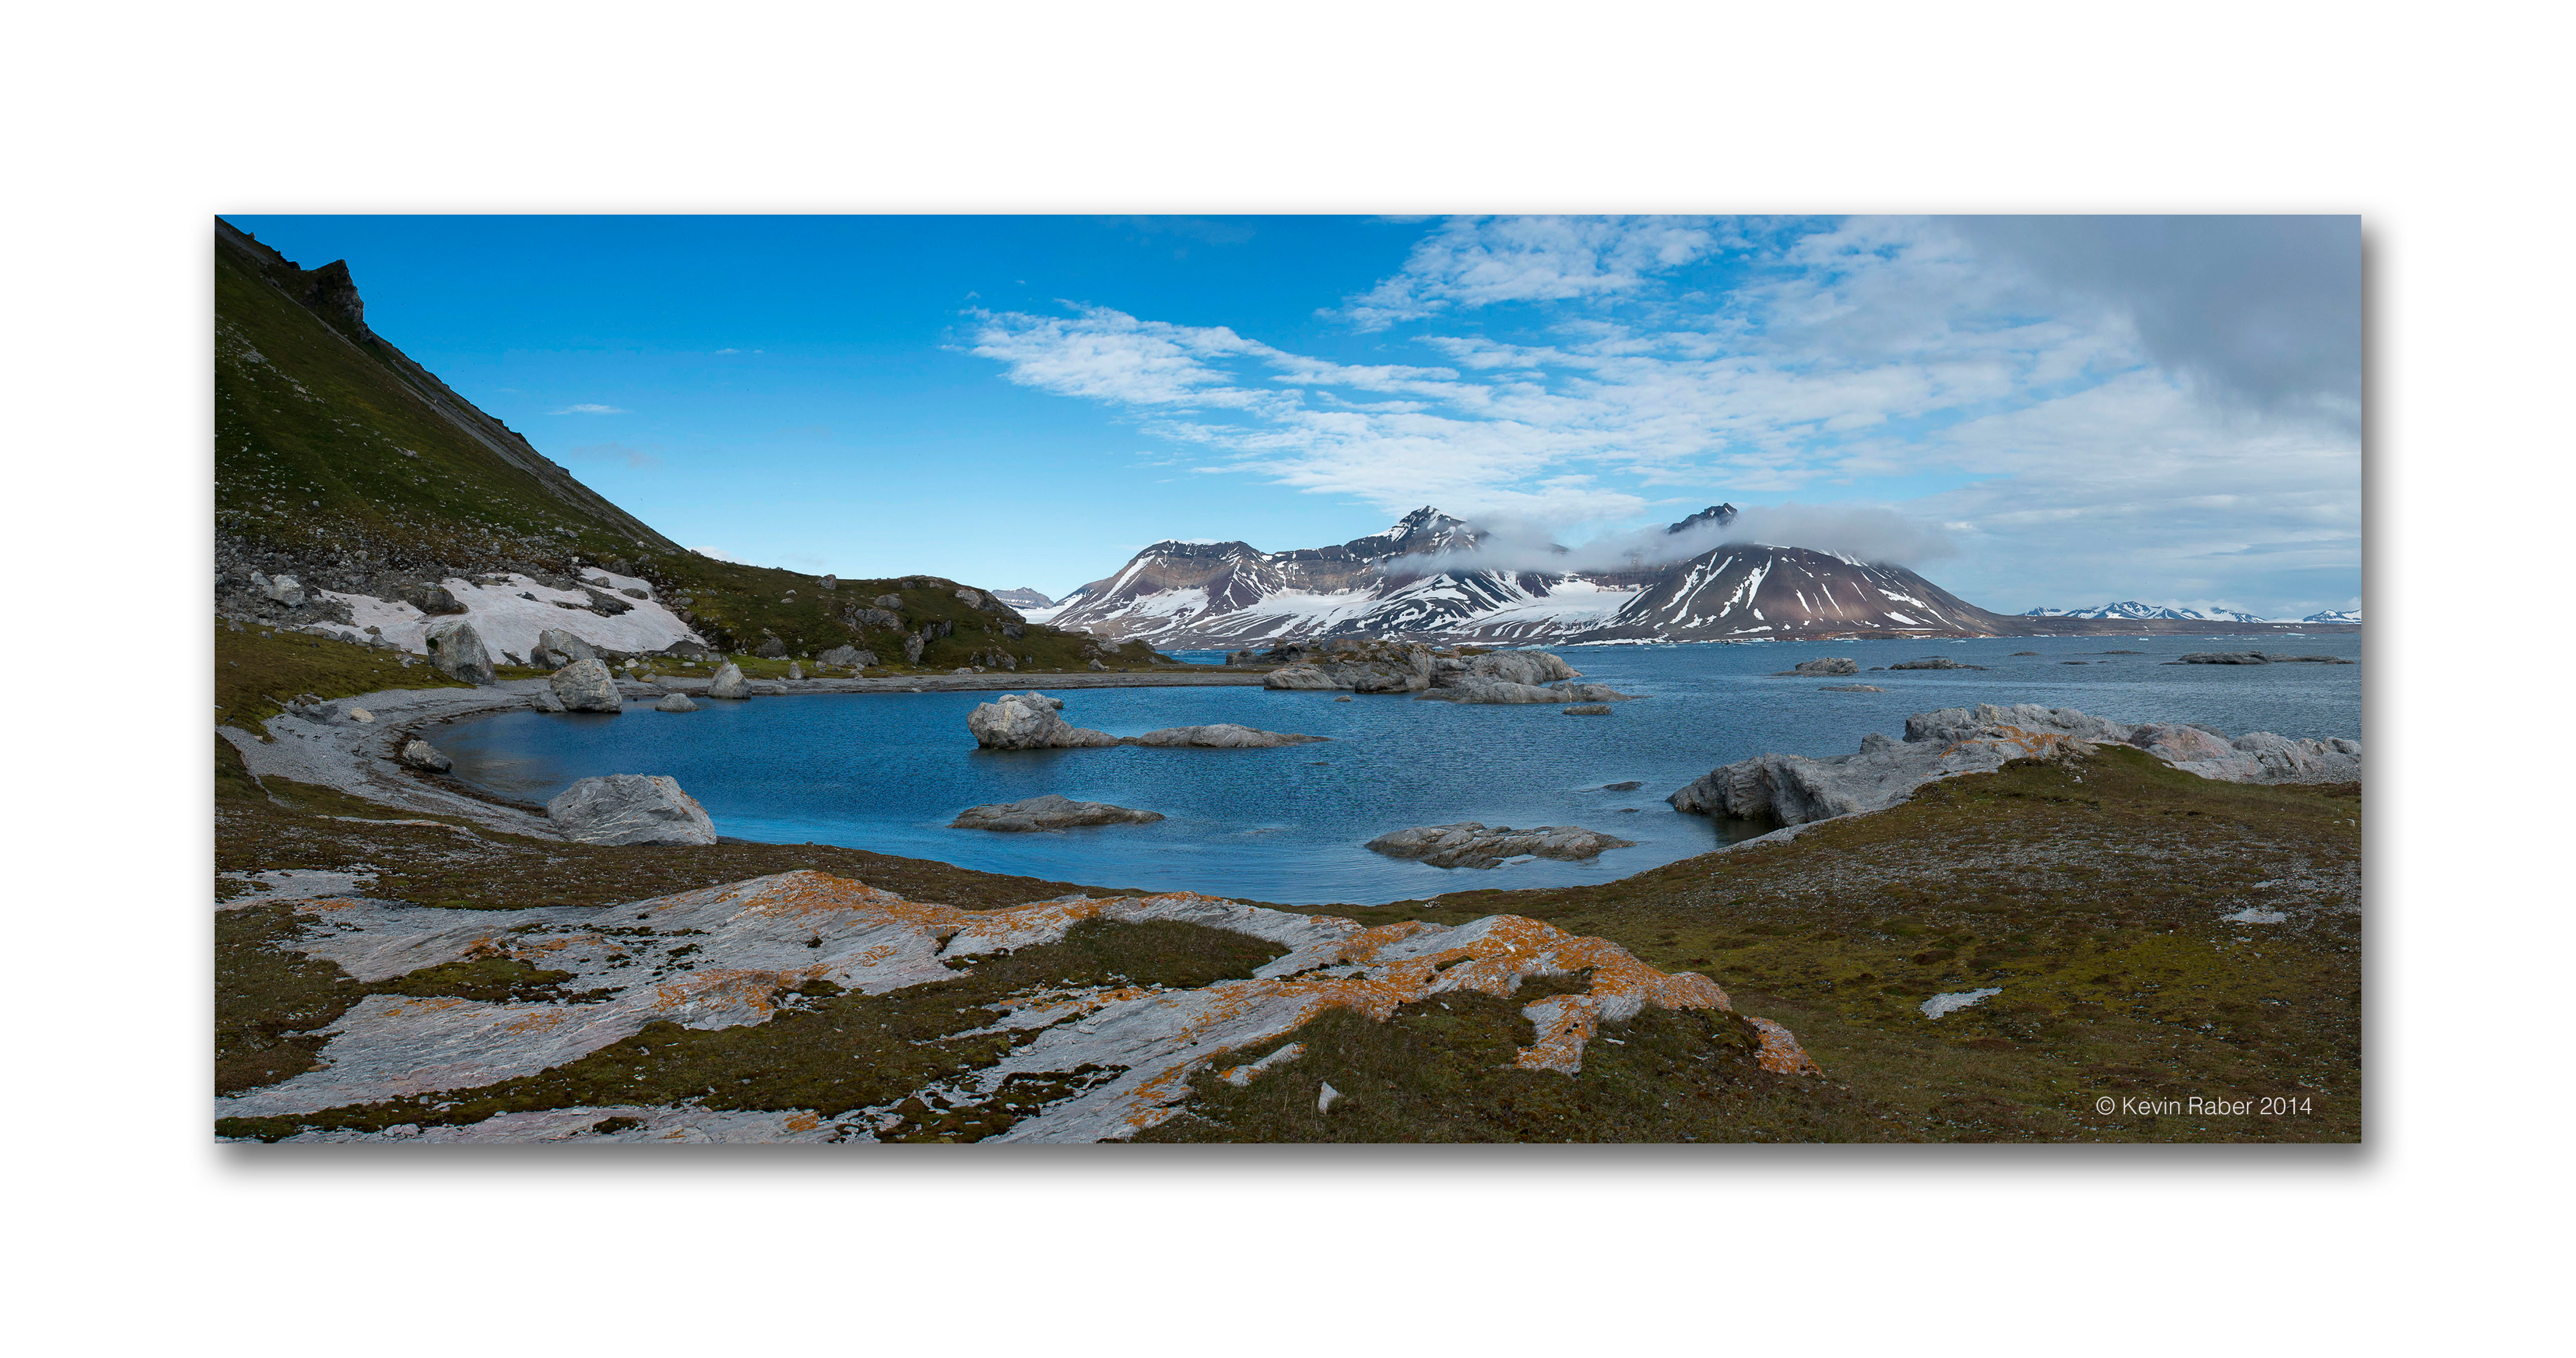 Svalbard Coastline Panorama, made from 14 images stitched together.